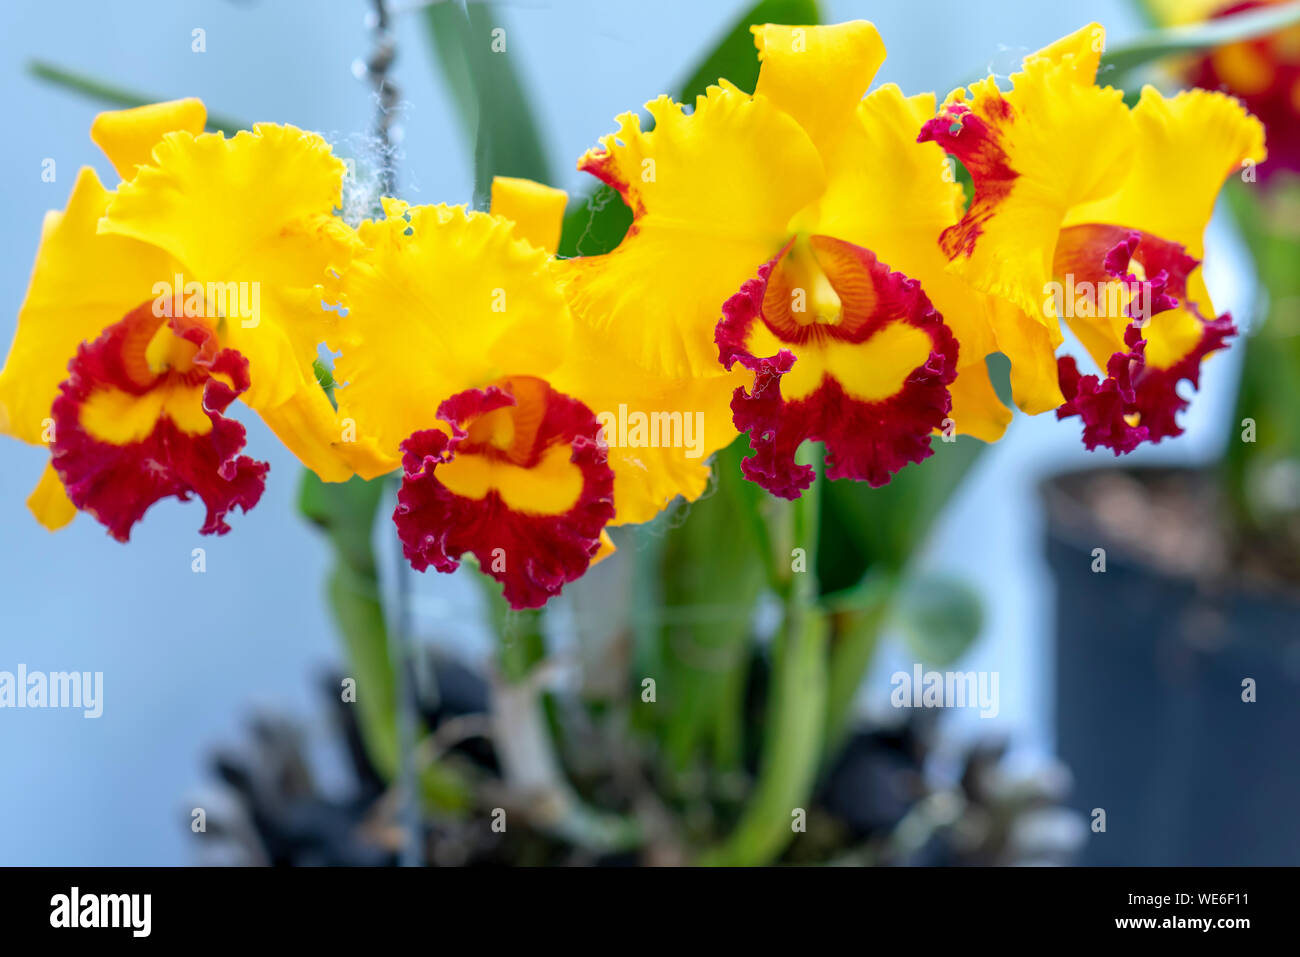 Cattleya Labiata flowers bloom in spring adorn the beauty of nature Stock Photo